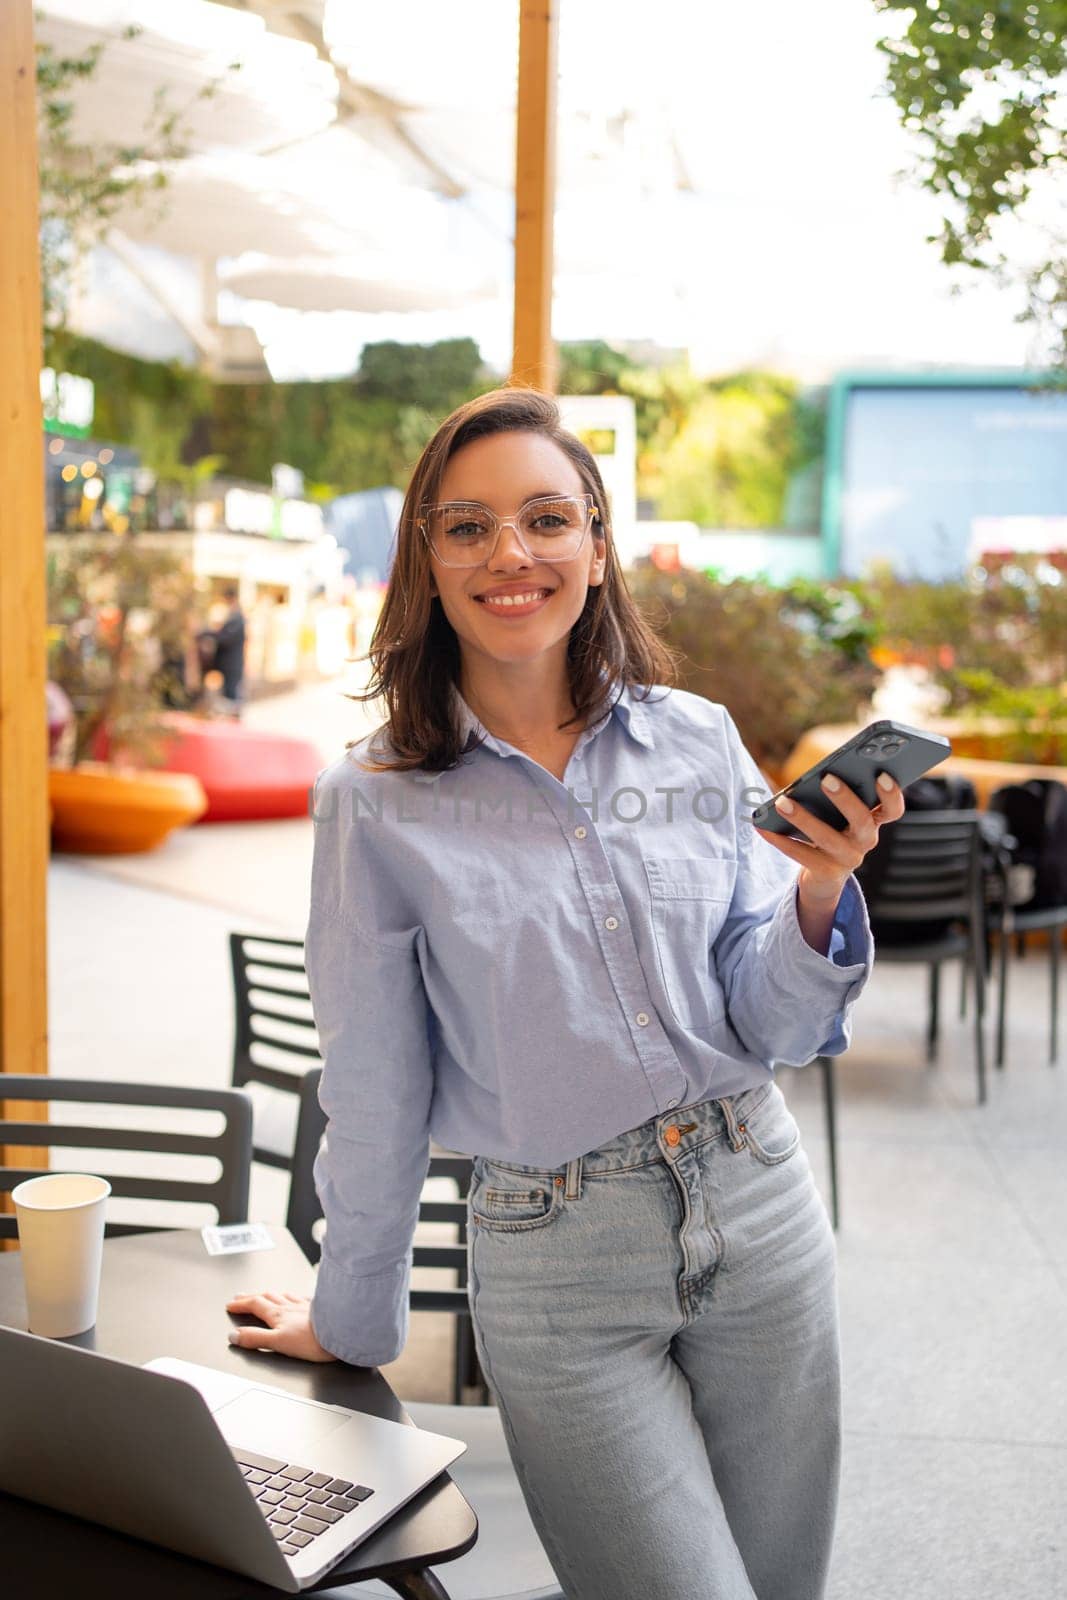 Freelance worker doing remote work using smartphone and laptop, looking at camera and smile. Female freelancer with mobile phone standing in outdoor cafe holding phone in hand. Vertical shoot